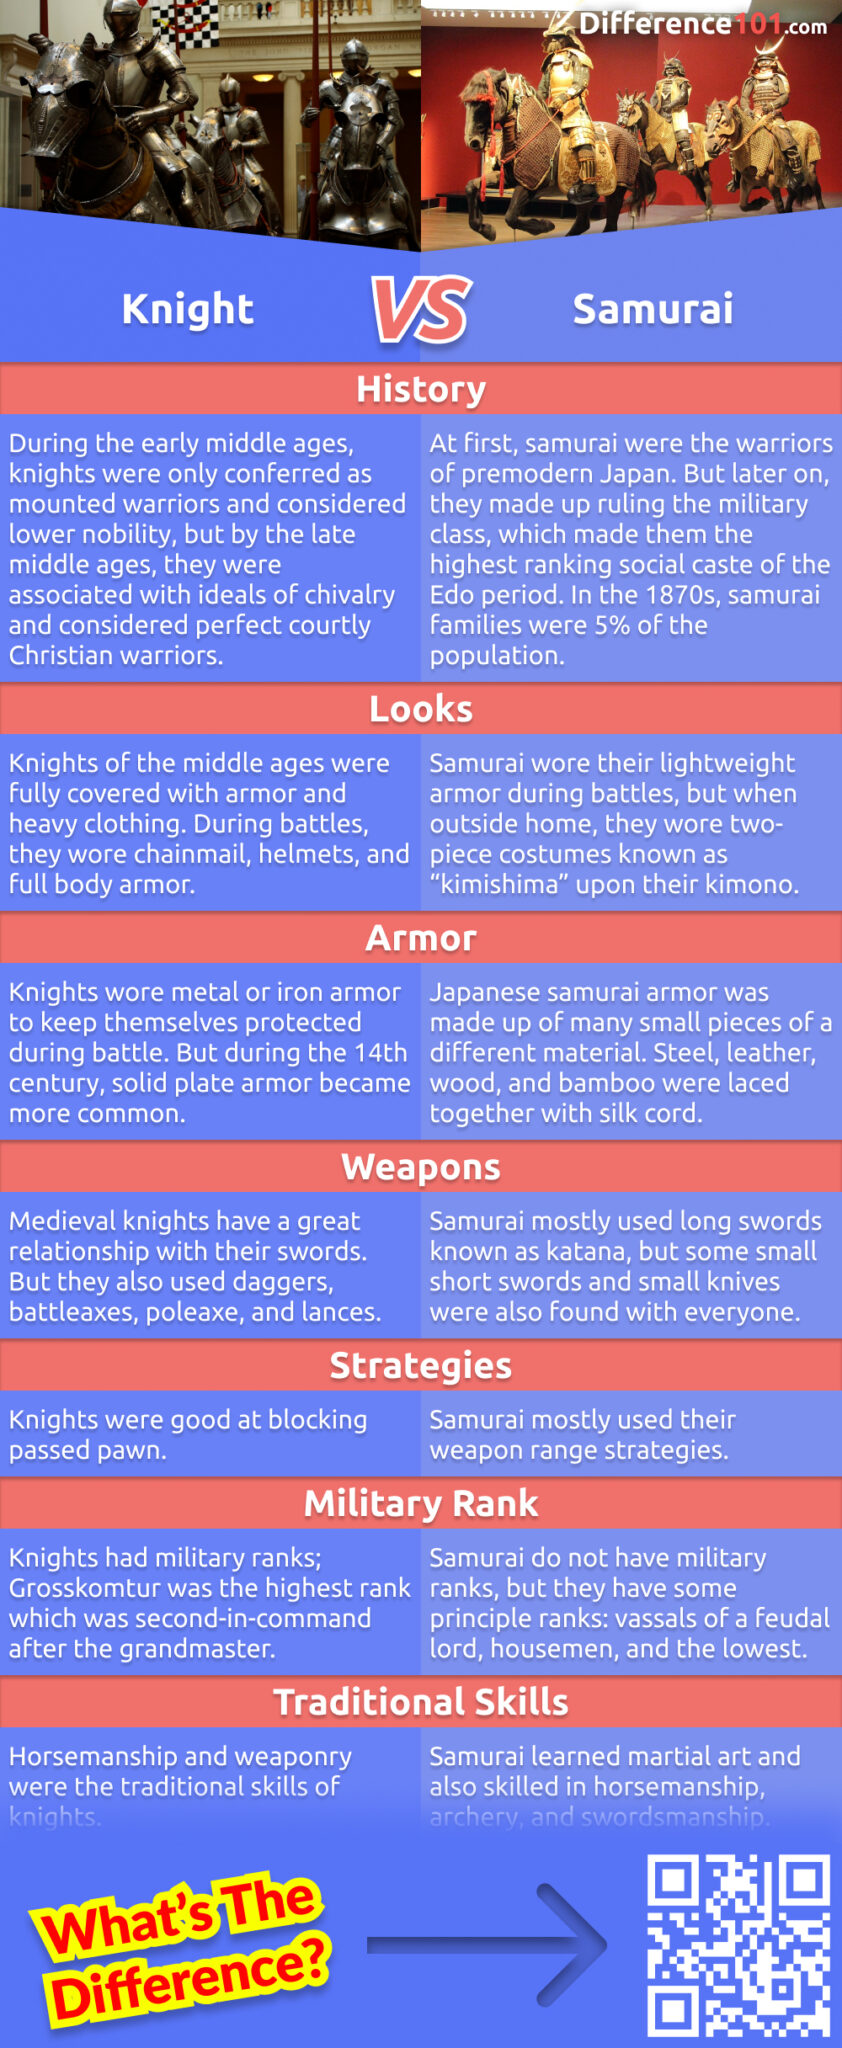 What is the difference between a knight and a samurai? Read more to learn about the strengths and weaknesses of each, similarities and differences between these two types of warriors.